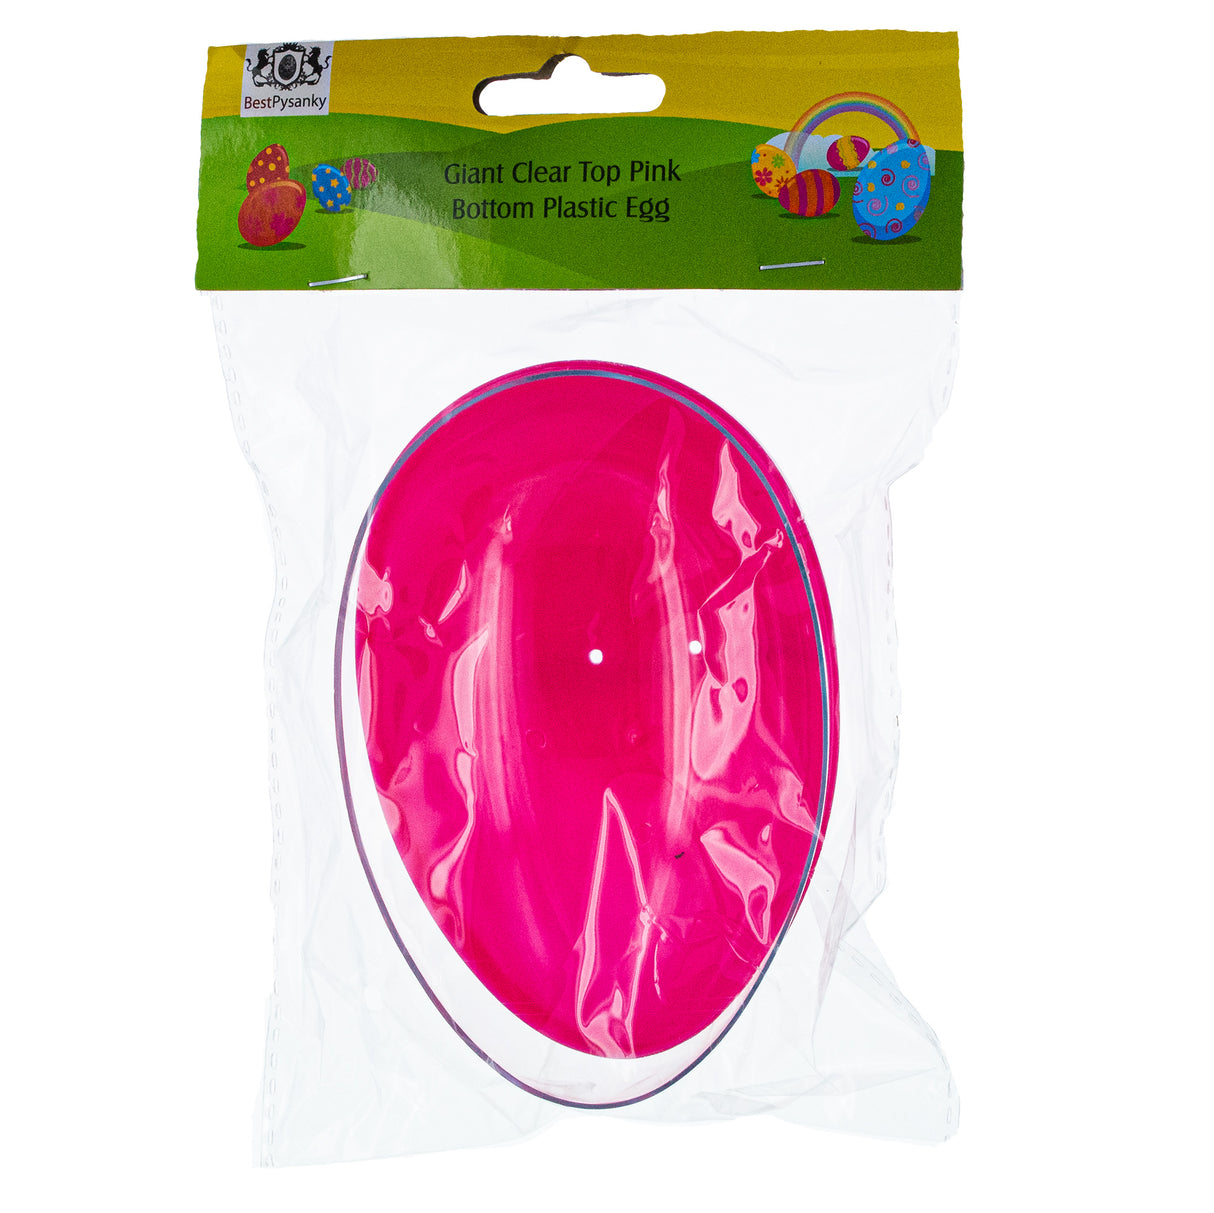 Shop Large Fillable Clear Top Pink Bottom Plastic Easter Egg 5.1 Inches. Buy Pink color Plastic Easter Eggs Plastic Large Egg for Sale by Online Gift Shop BestPysanky